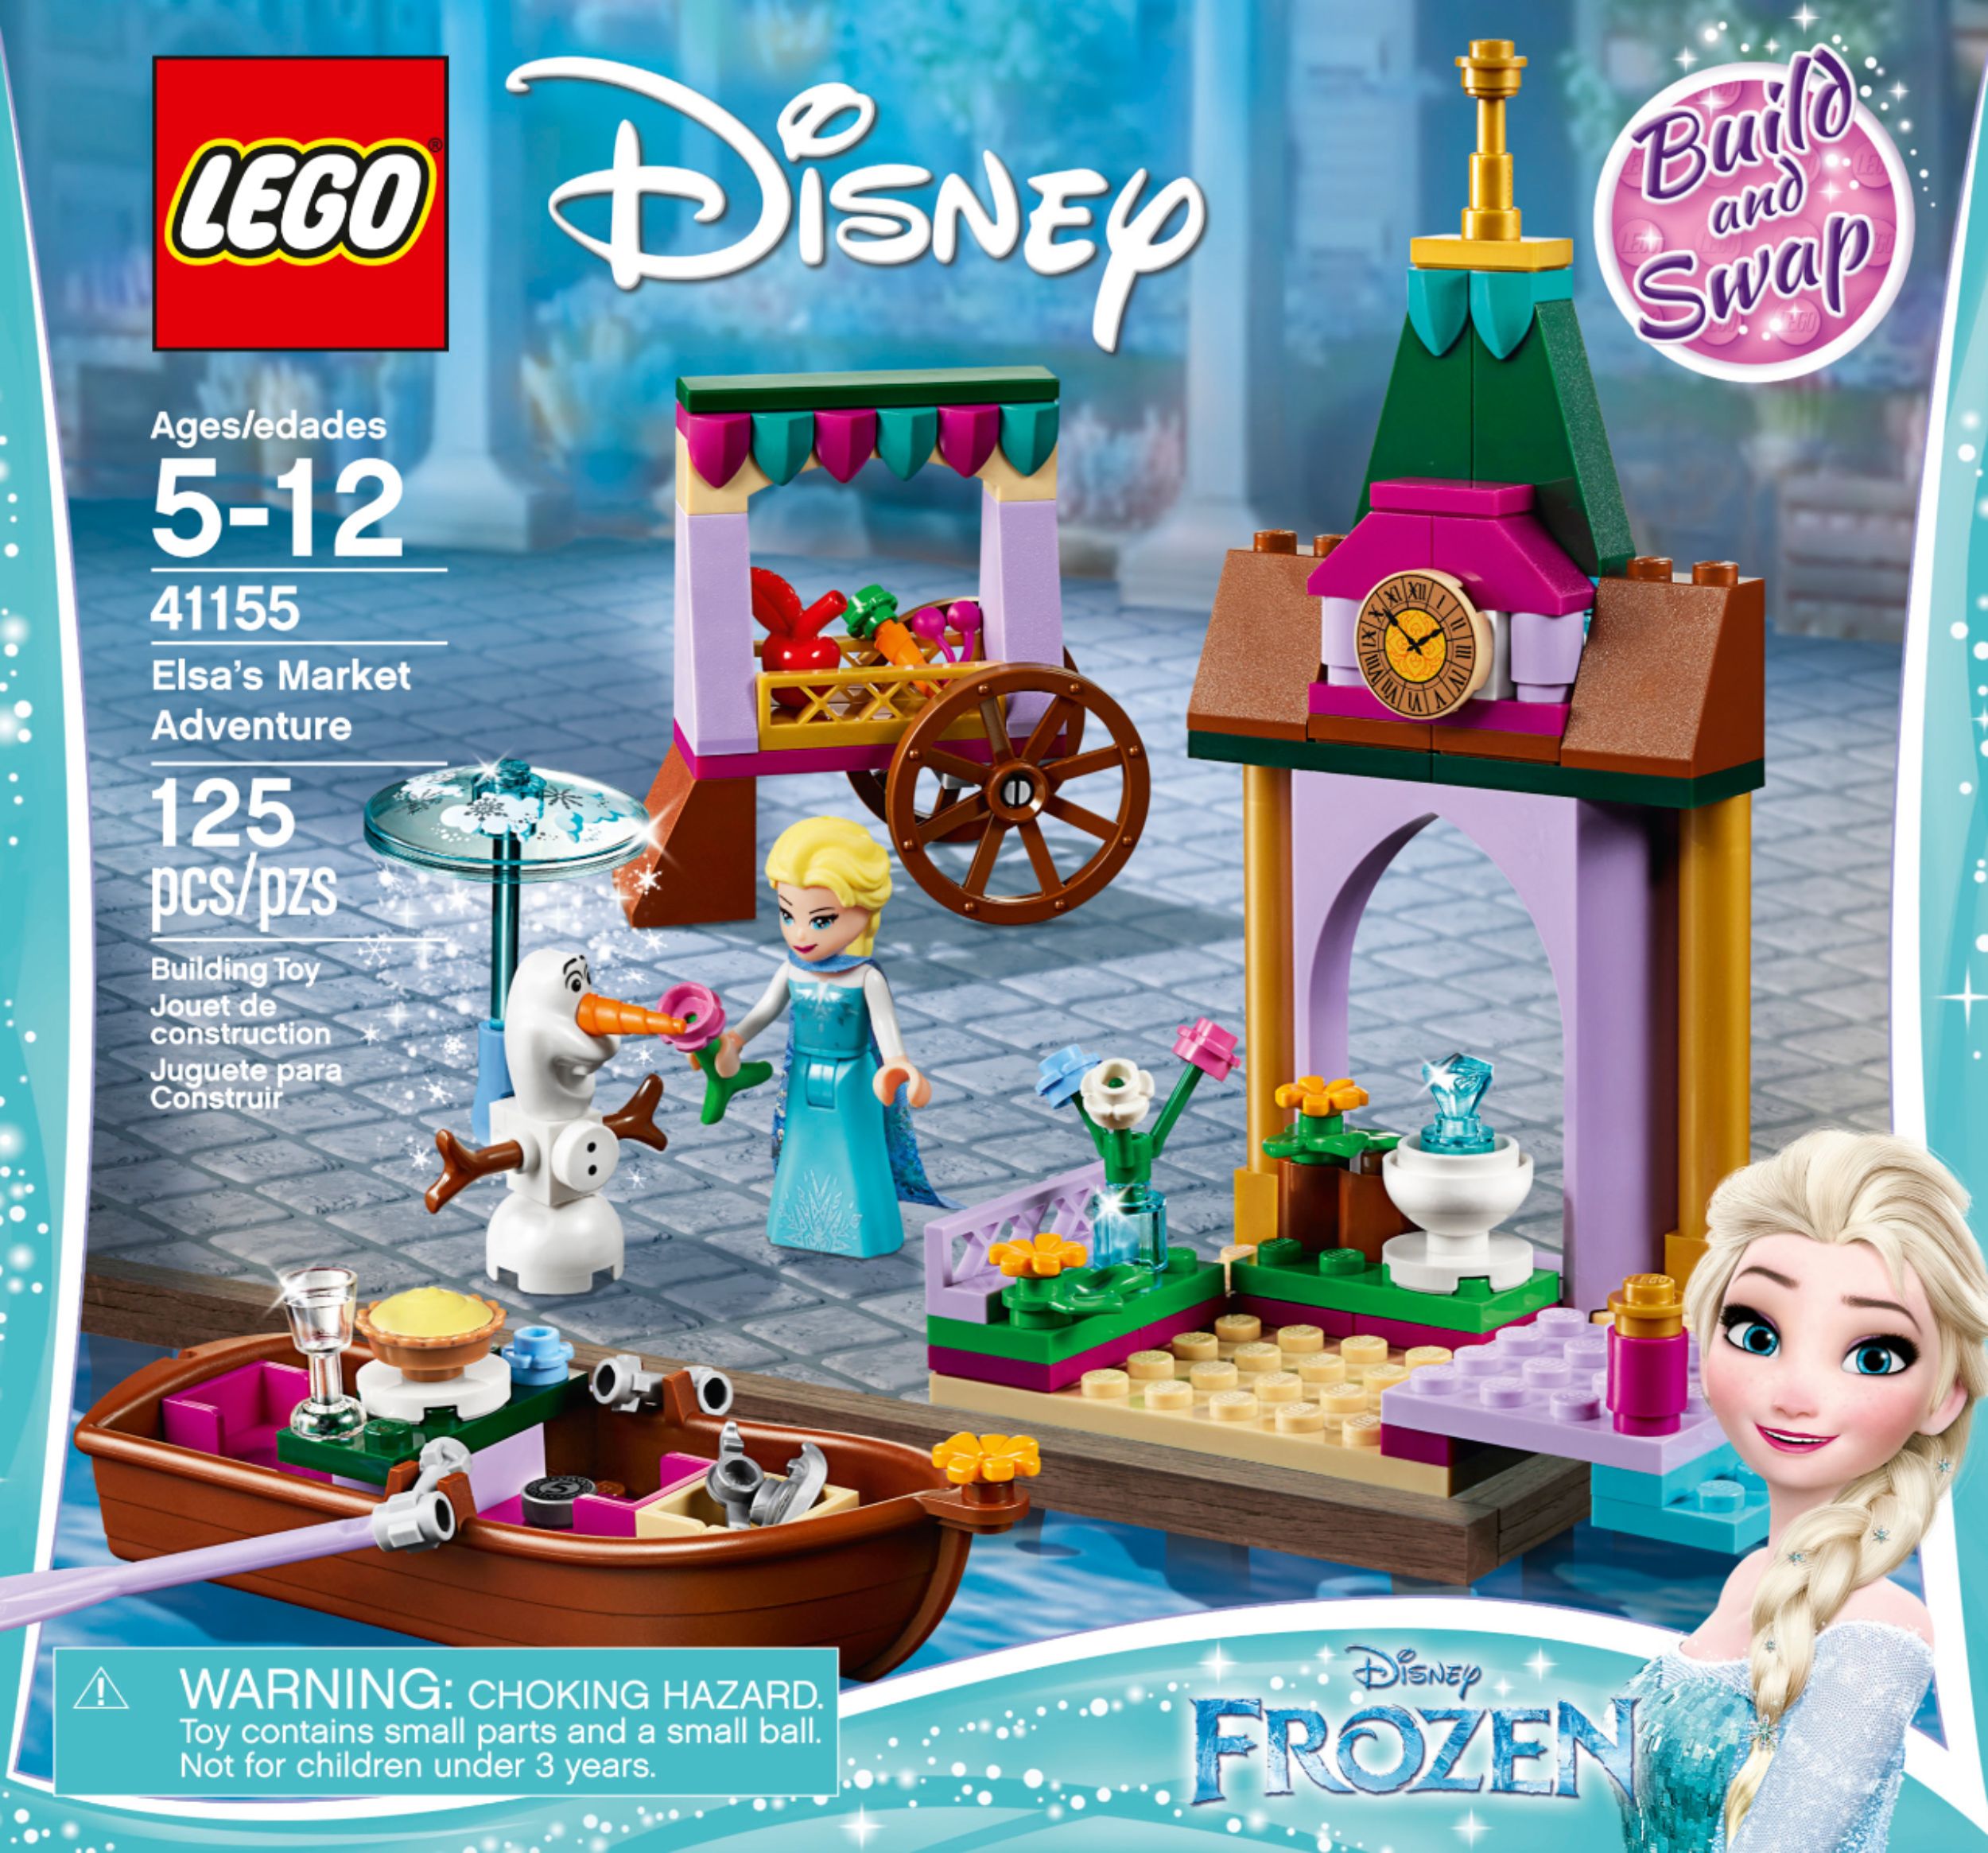 From Set 41155 with Buttons Olaf LEGO Disney Princess Frozen 2 MiniFigure 